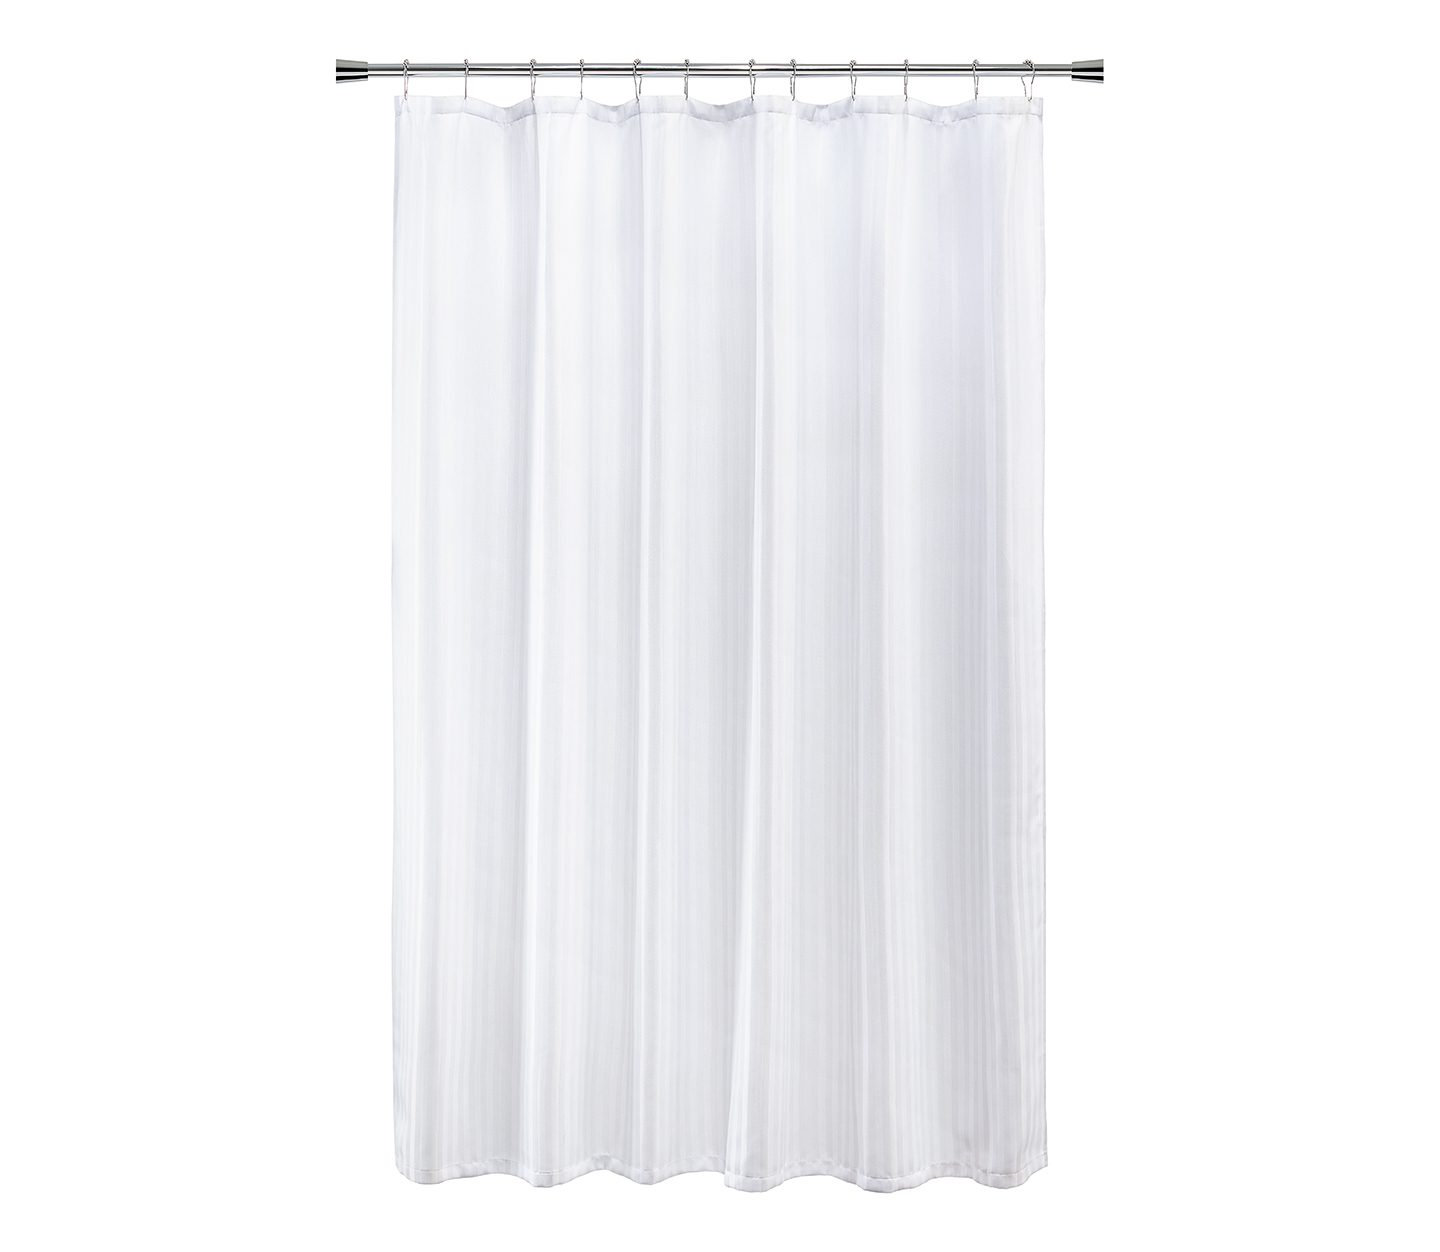 Hooked Shower Curtains Standard Textile